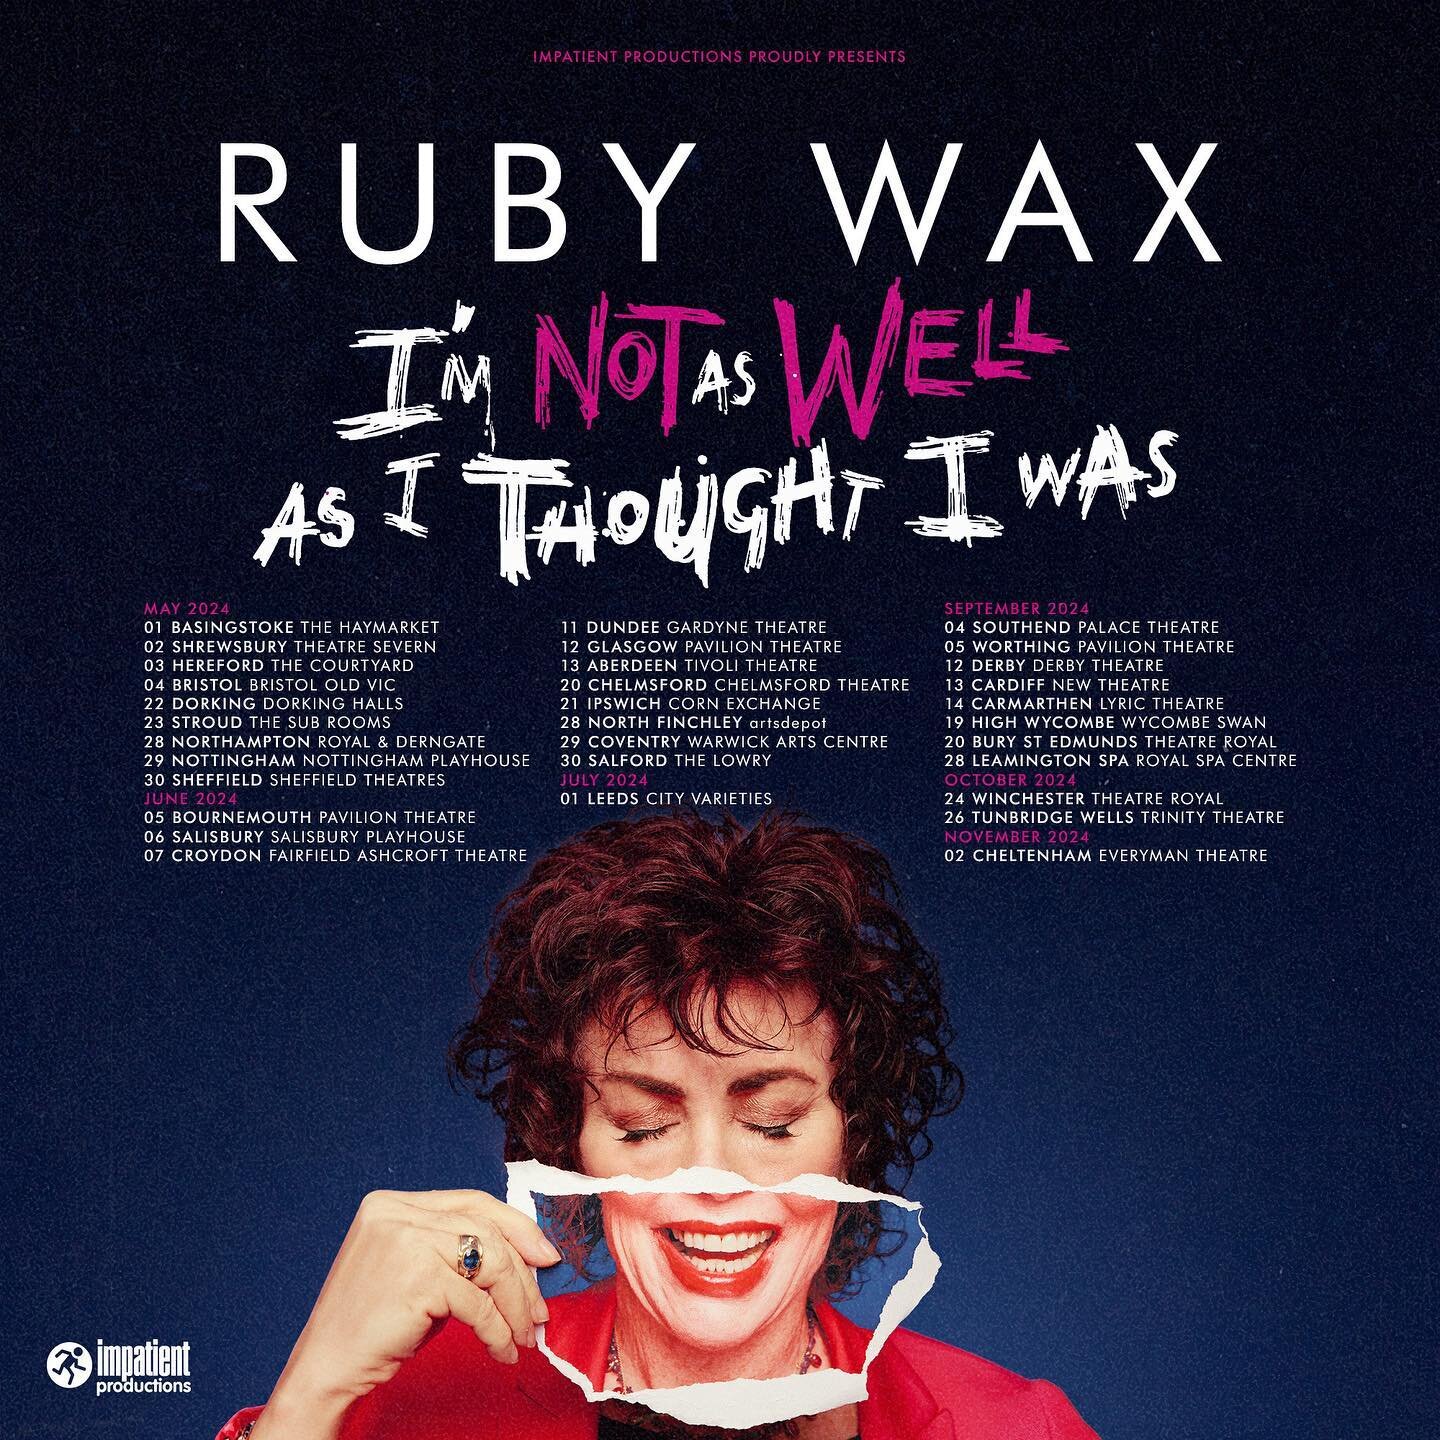 Following the success of her 2024 tour, I&rsquo;m Not As Well As I Thought I Was, the brilliant @rubywax has just announced her tour will be continuing with a run of new dates for 2024.

Tickets are on sale now 🎟️

#RubyWax #ImNotAsWellAsIThoughtIWa